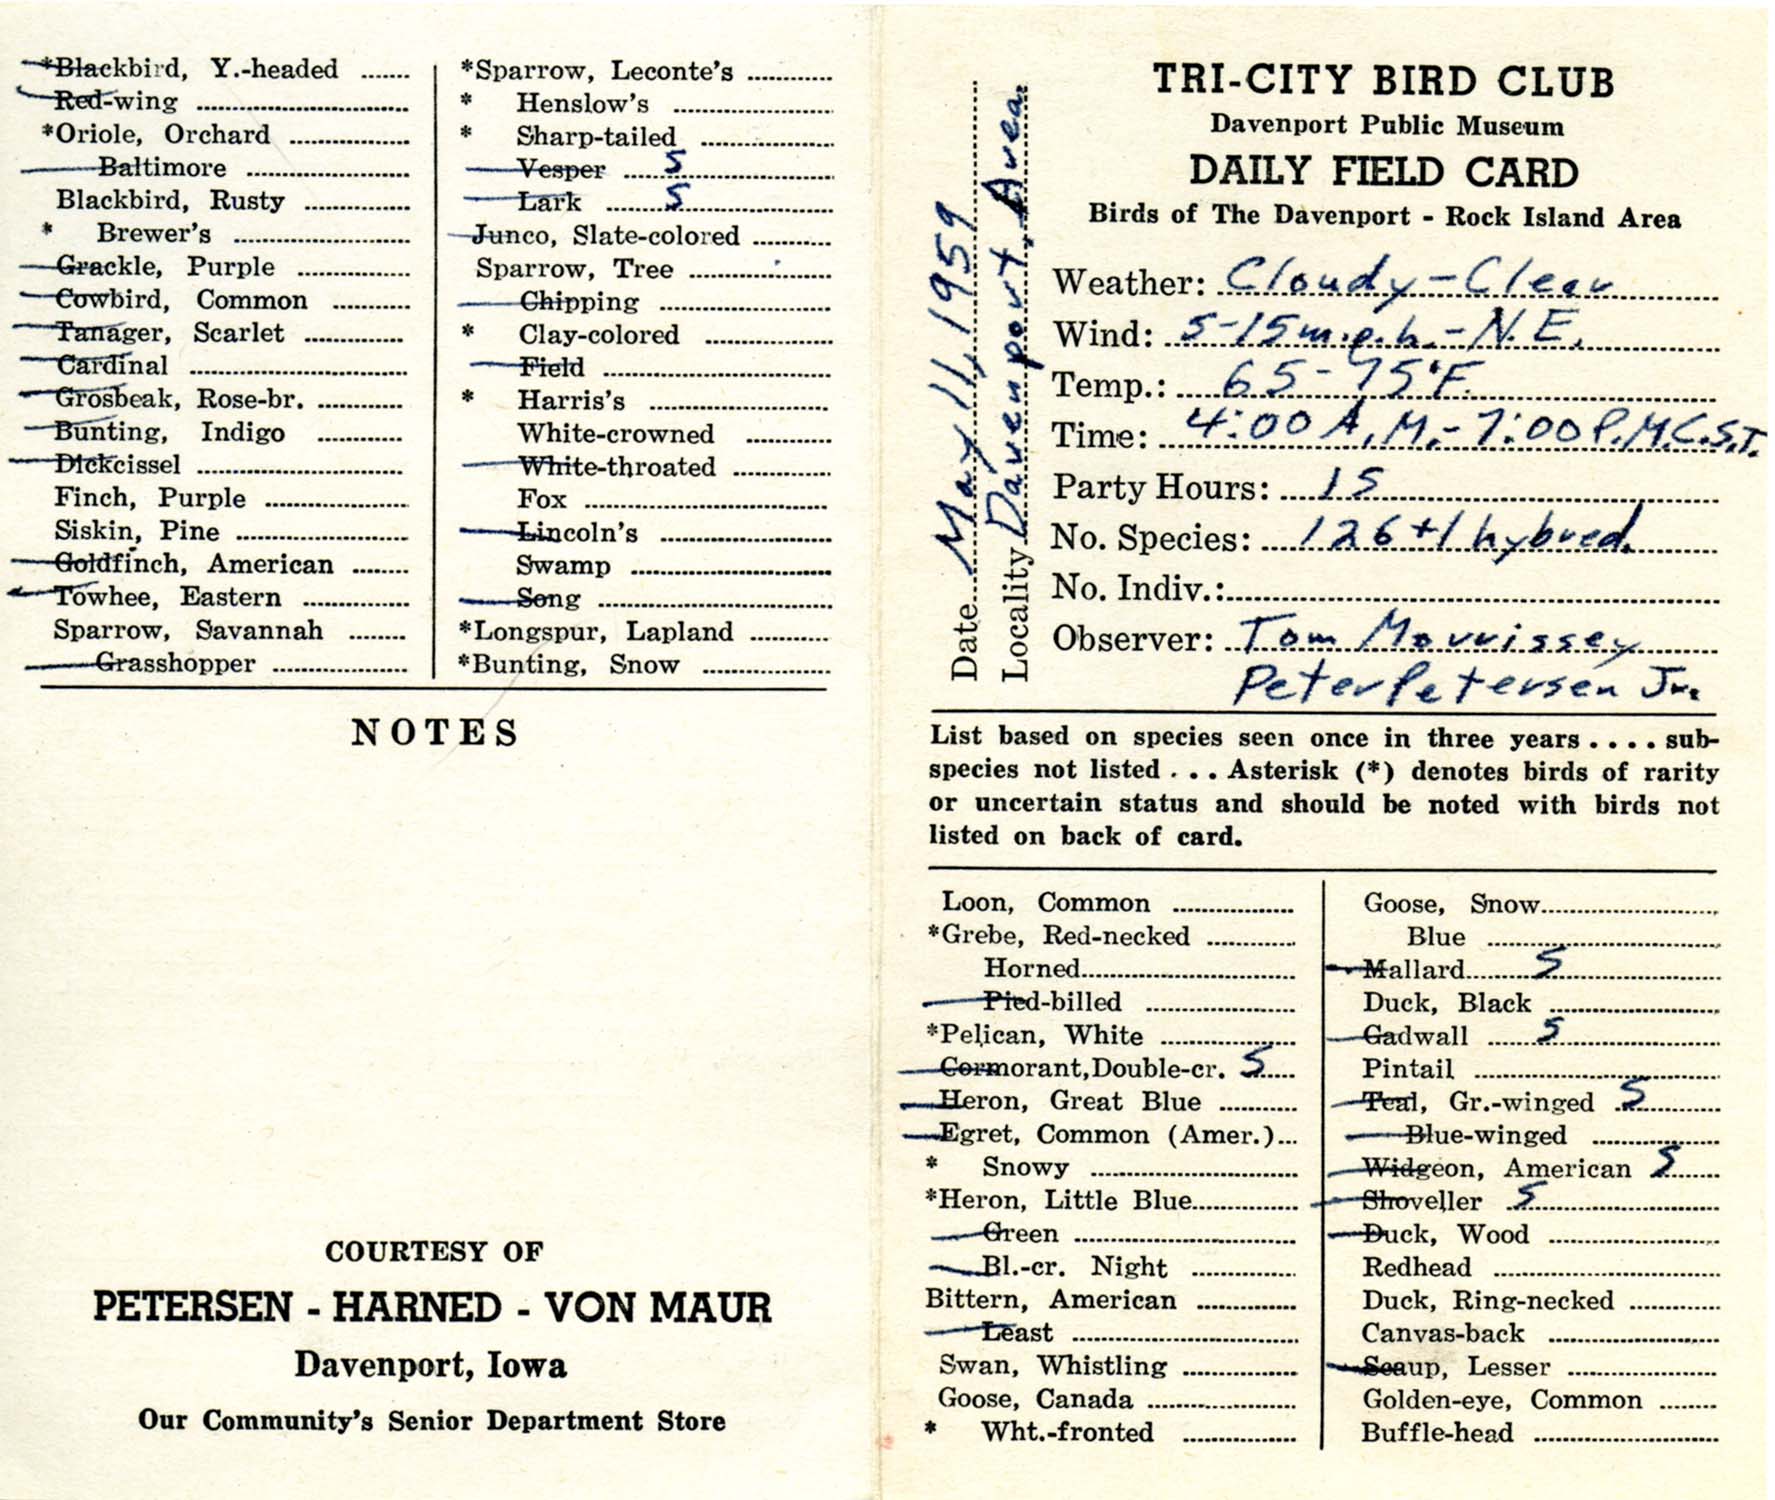 Tri-City bird checklist compiled by Peter C. Petersen and Thomas Morrissey, May 11, 1959